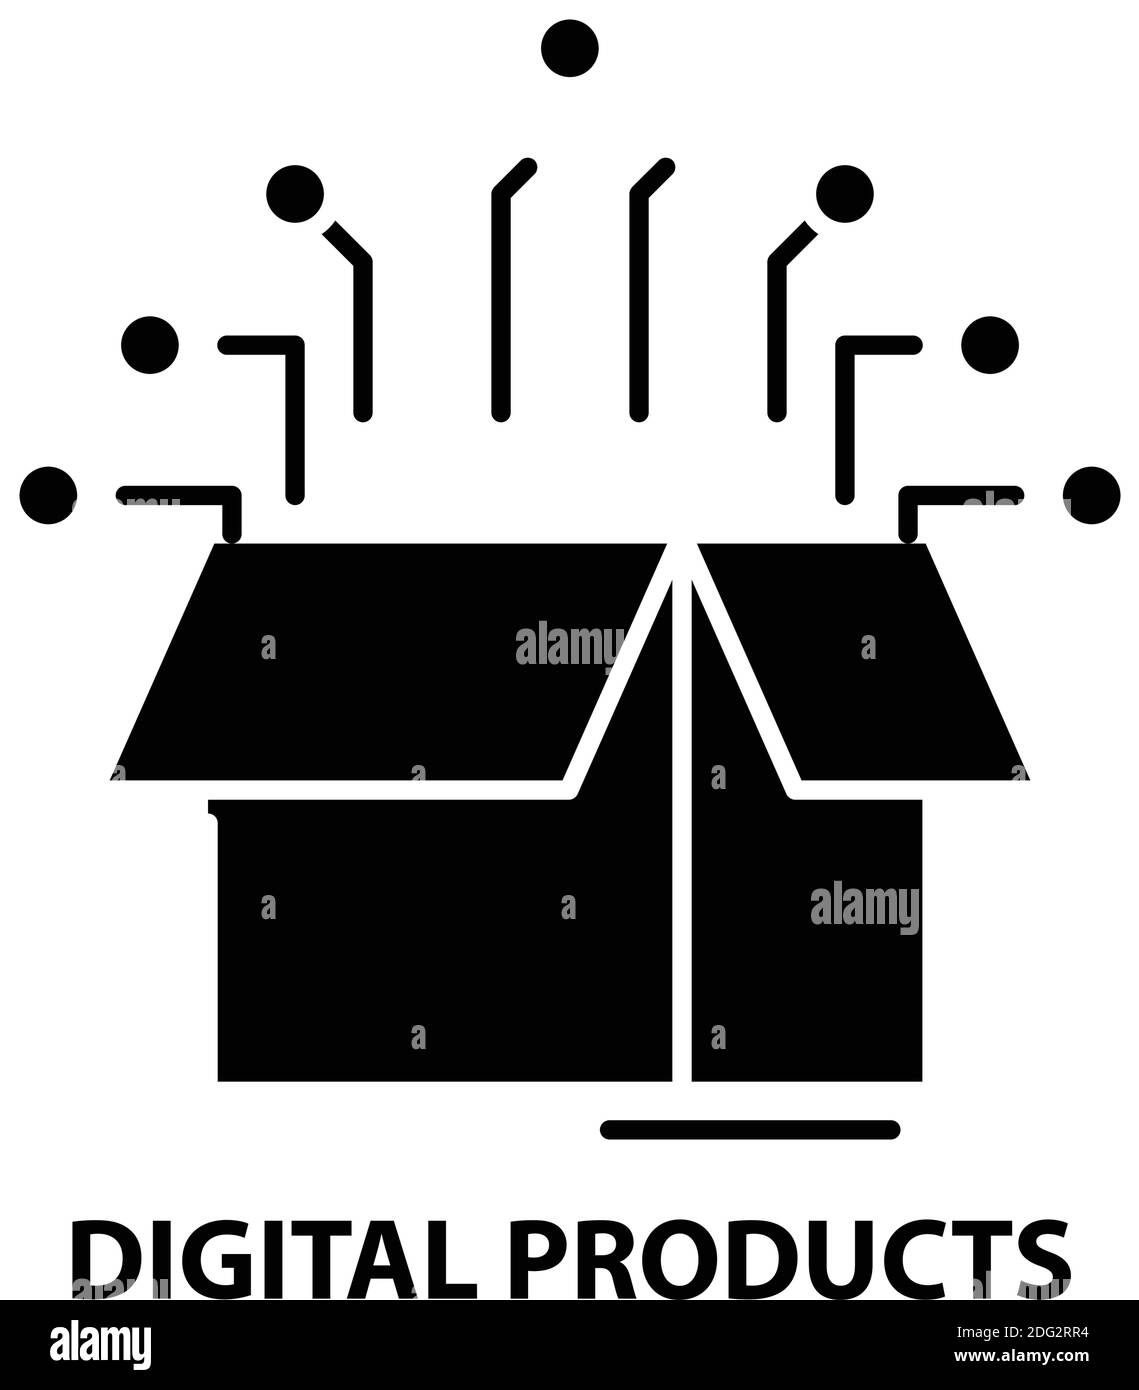 digital products icon, black vector sign with editable strokes, concept illustration Stock Vector